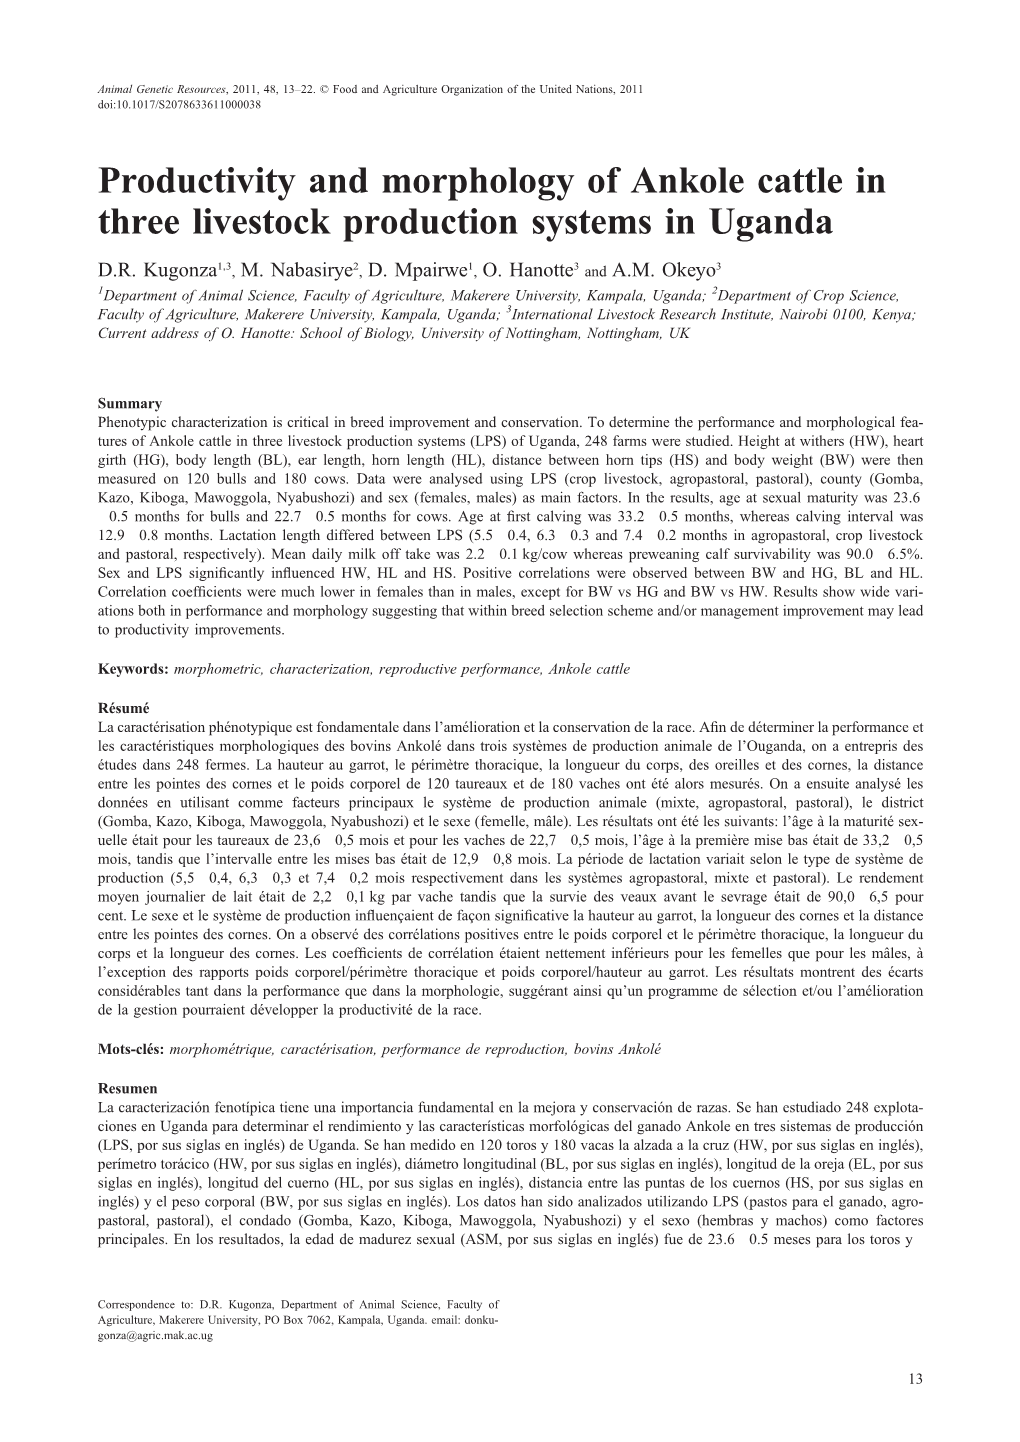 Productivity and Morphology of Ankole Cattle in Three Livestock Production Systems in Uganda